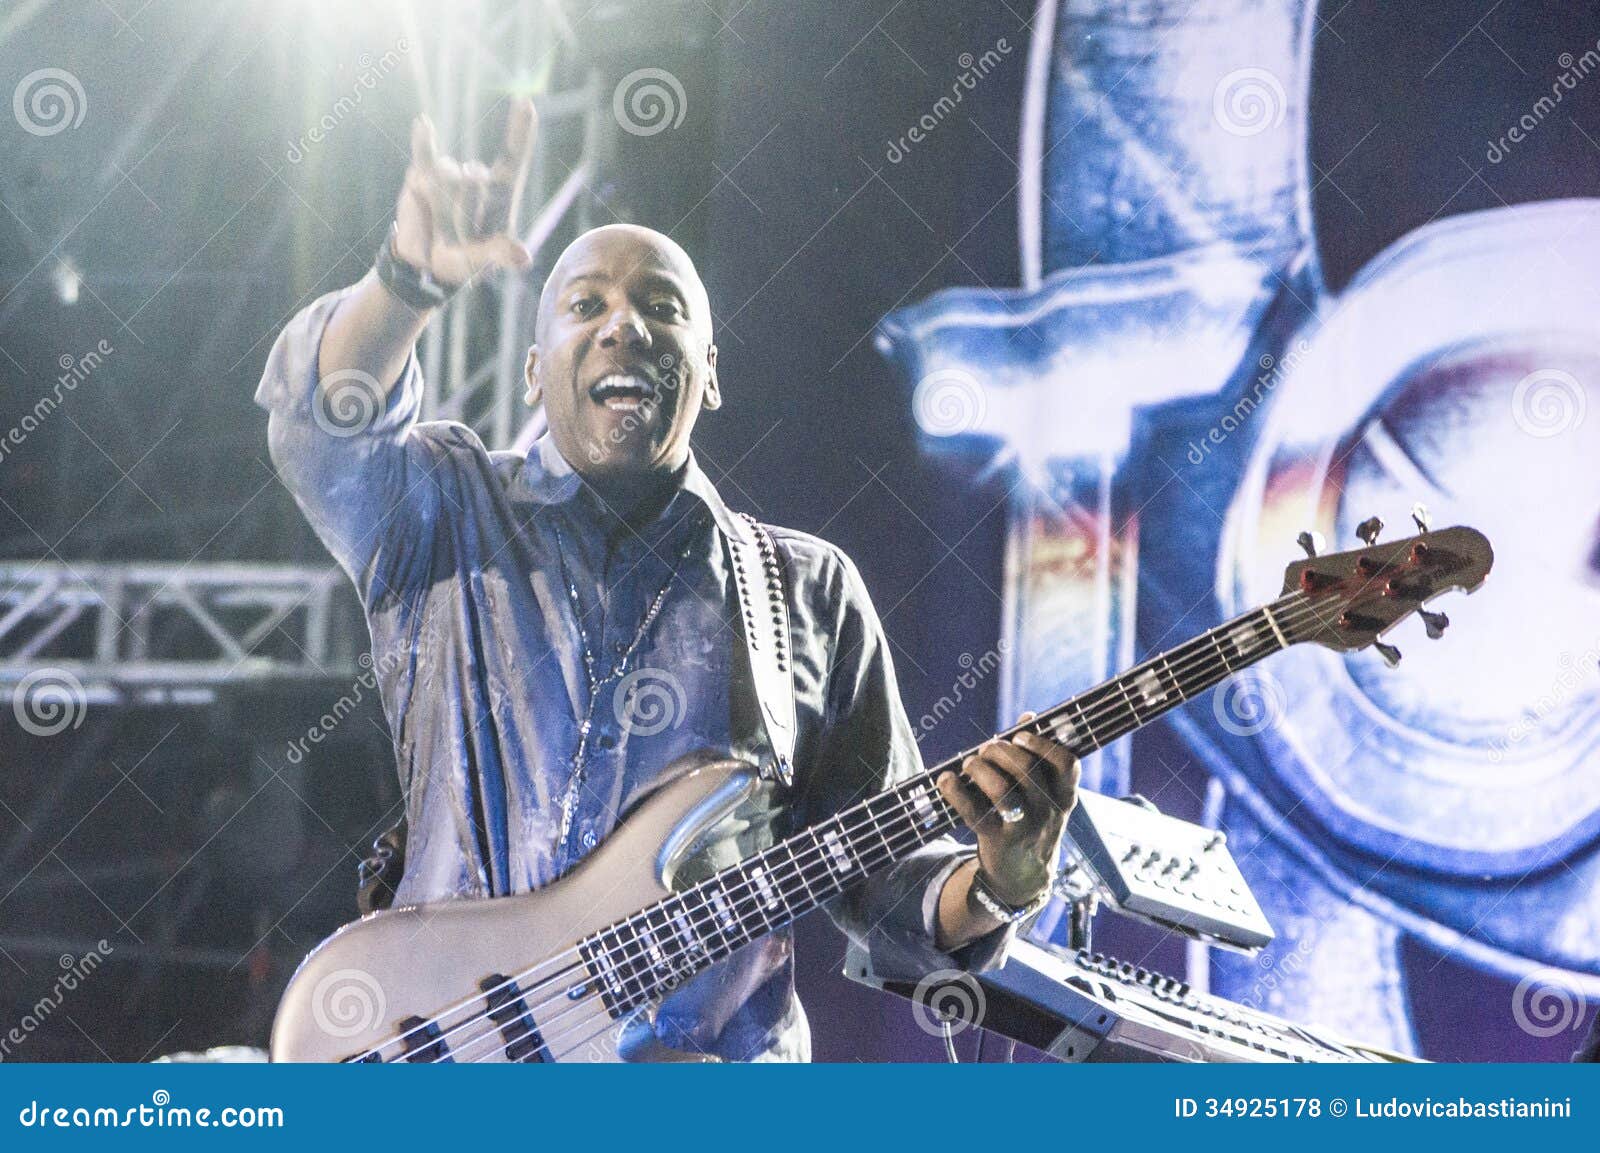 https://thumbs.dreamstime.com/z/nathan-east-toto-live-bass-player-rome-italy-june-34925178.jpg